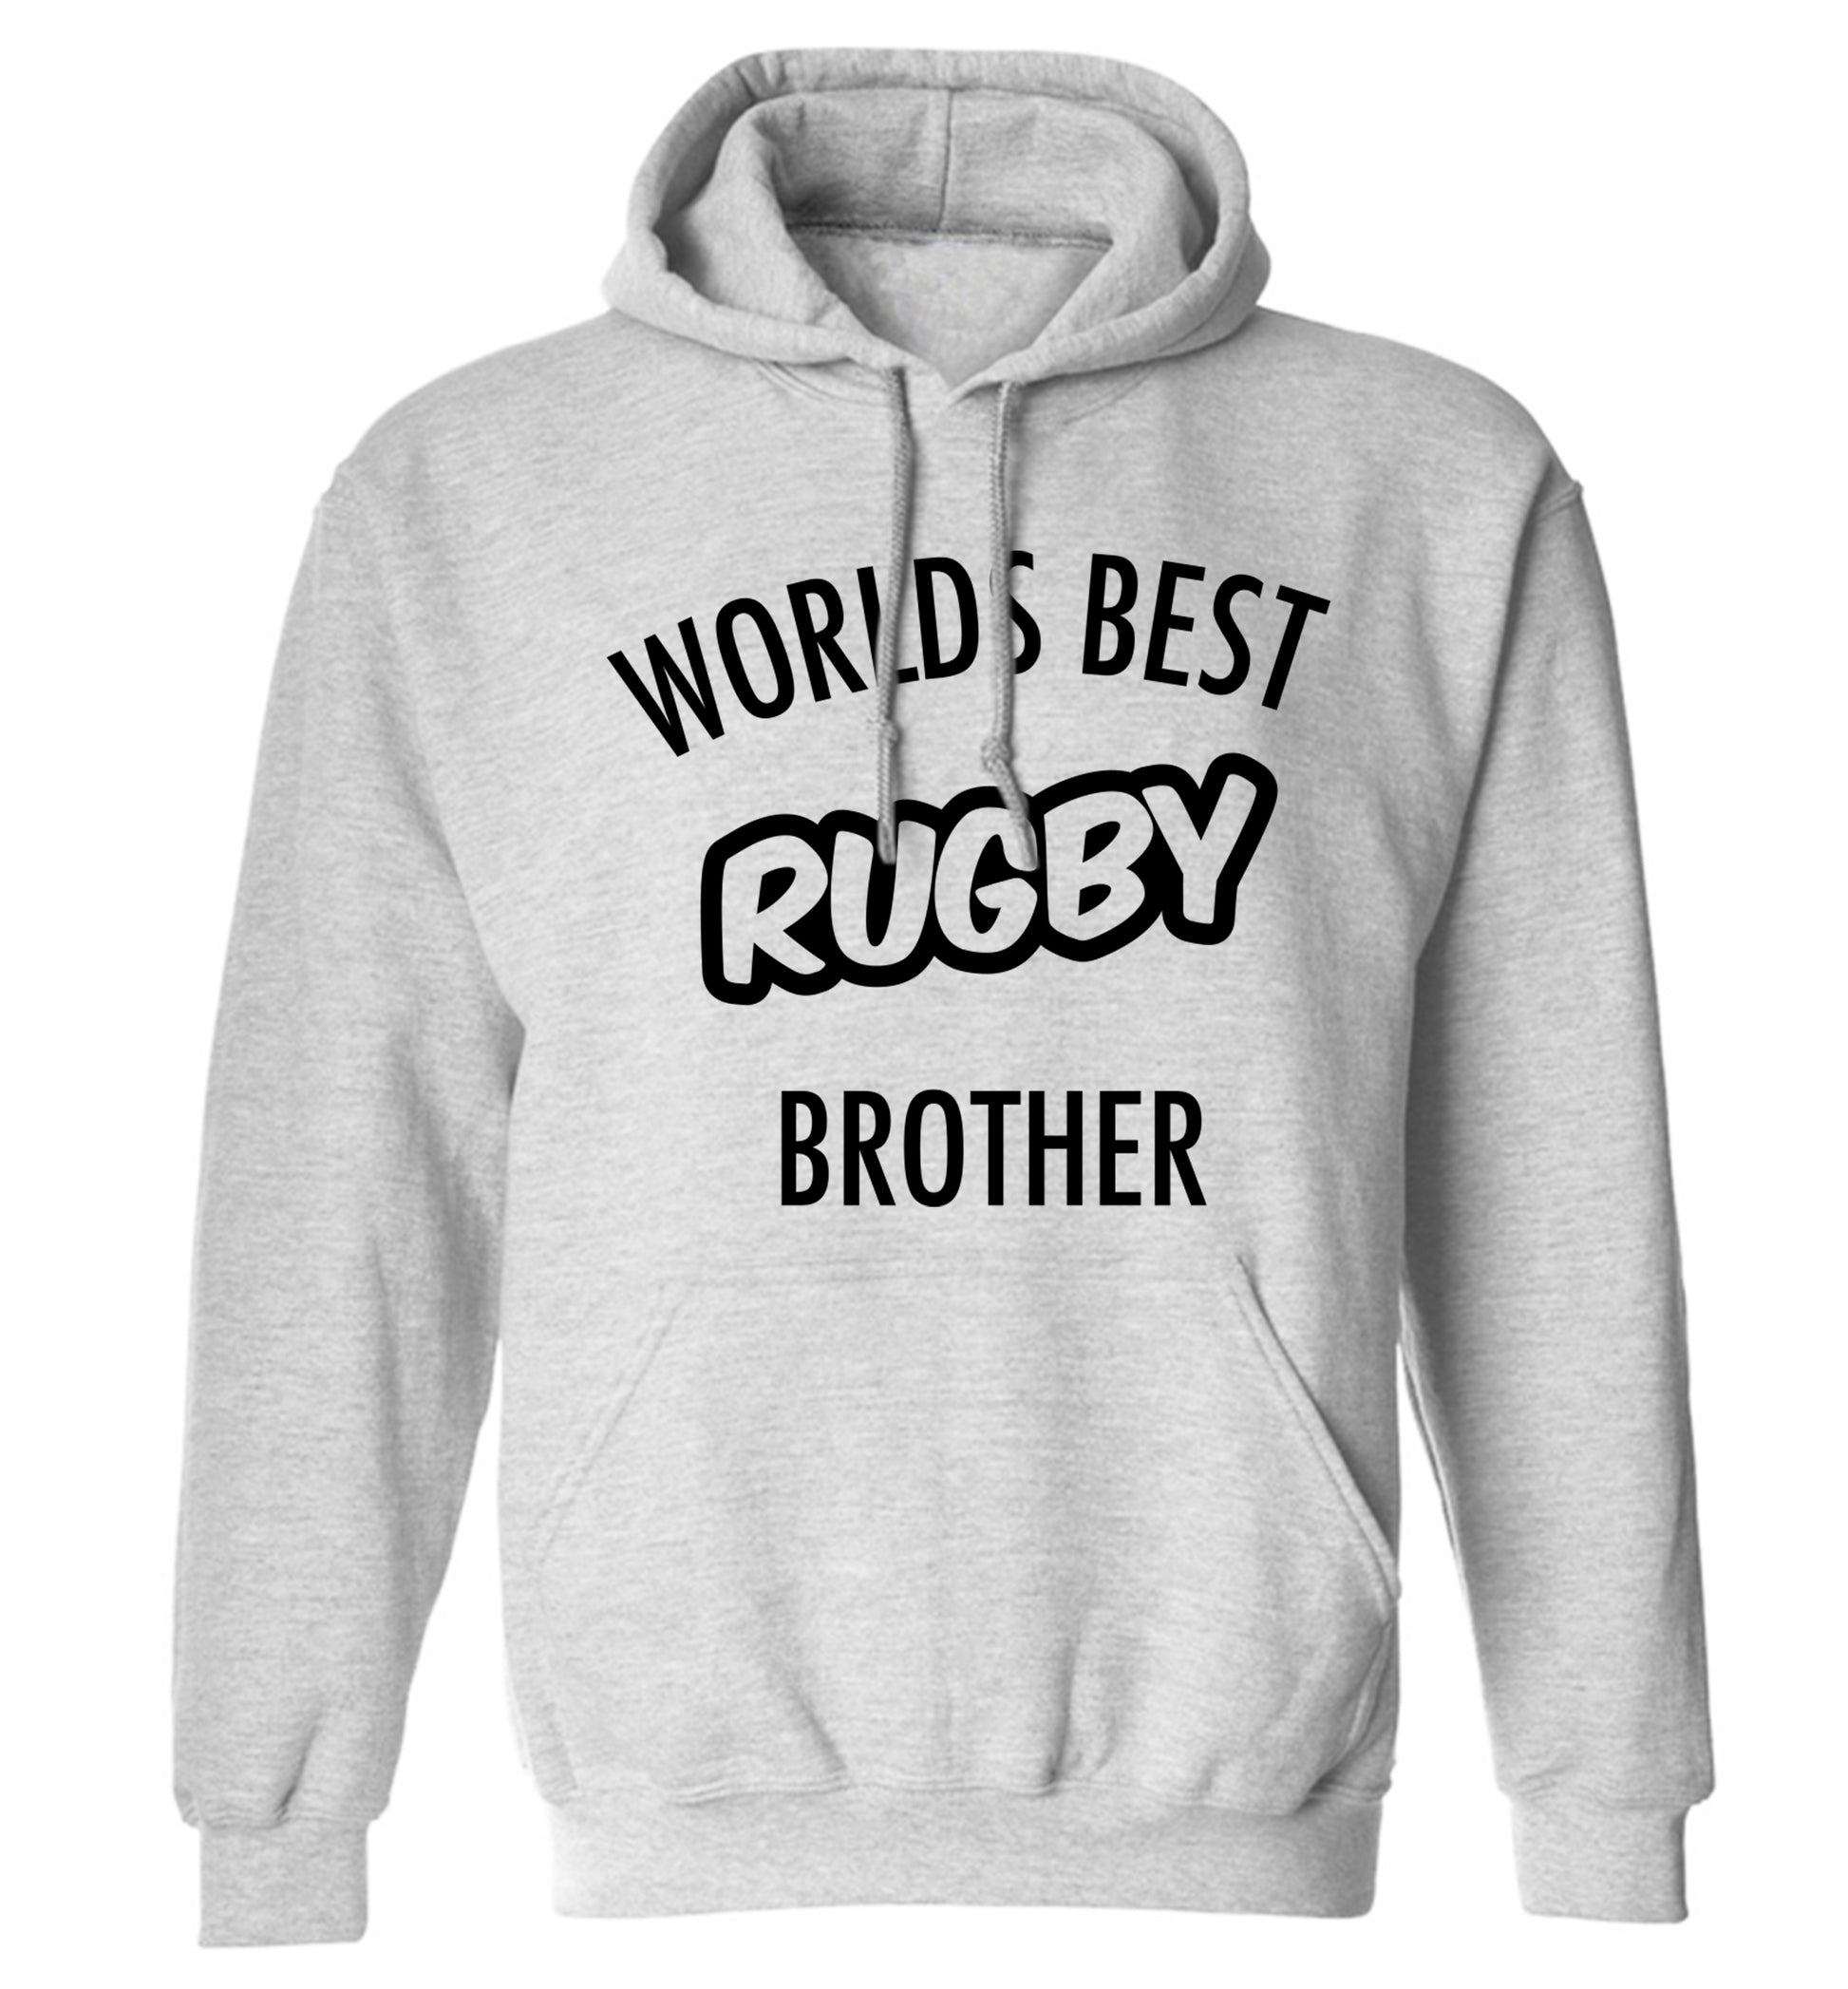 Worlds best rugby brother adults unisex grey hoodie 2XL